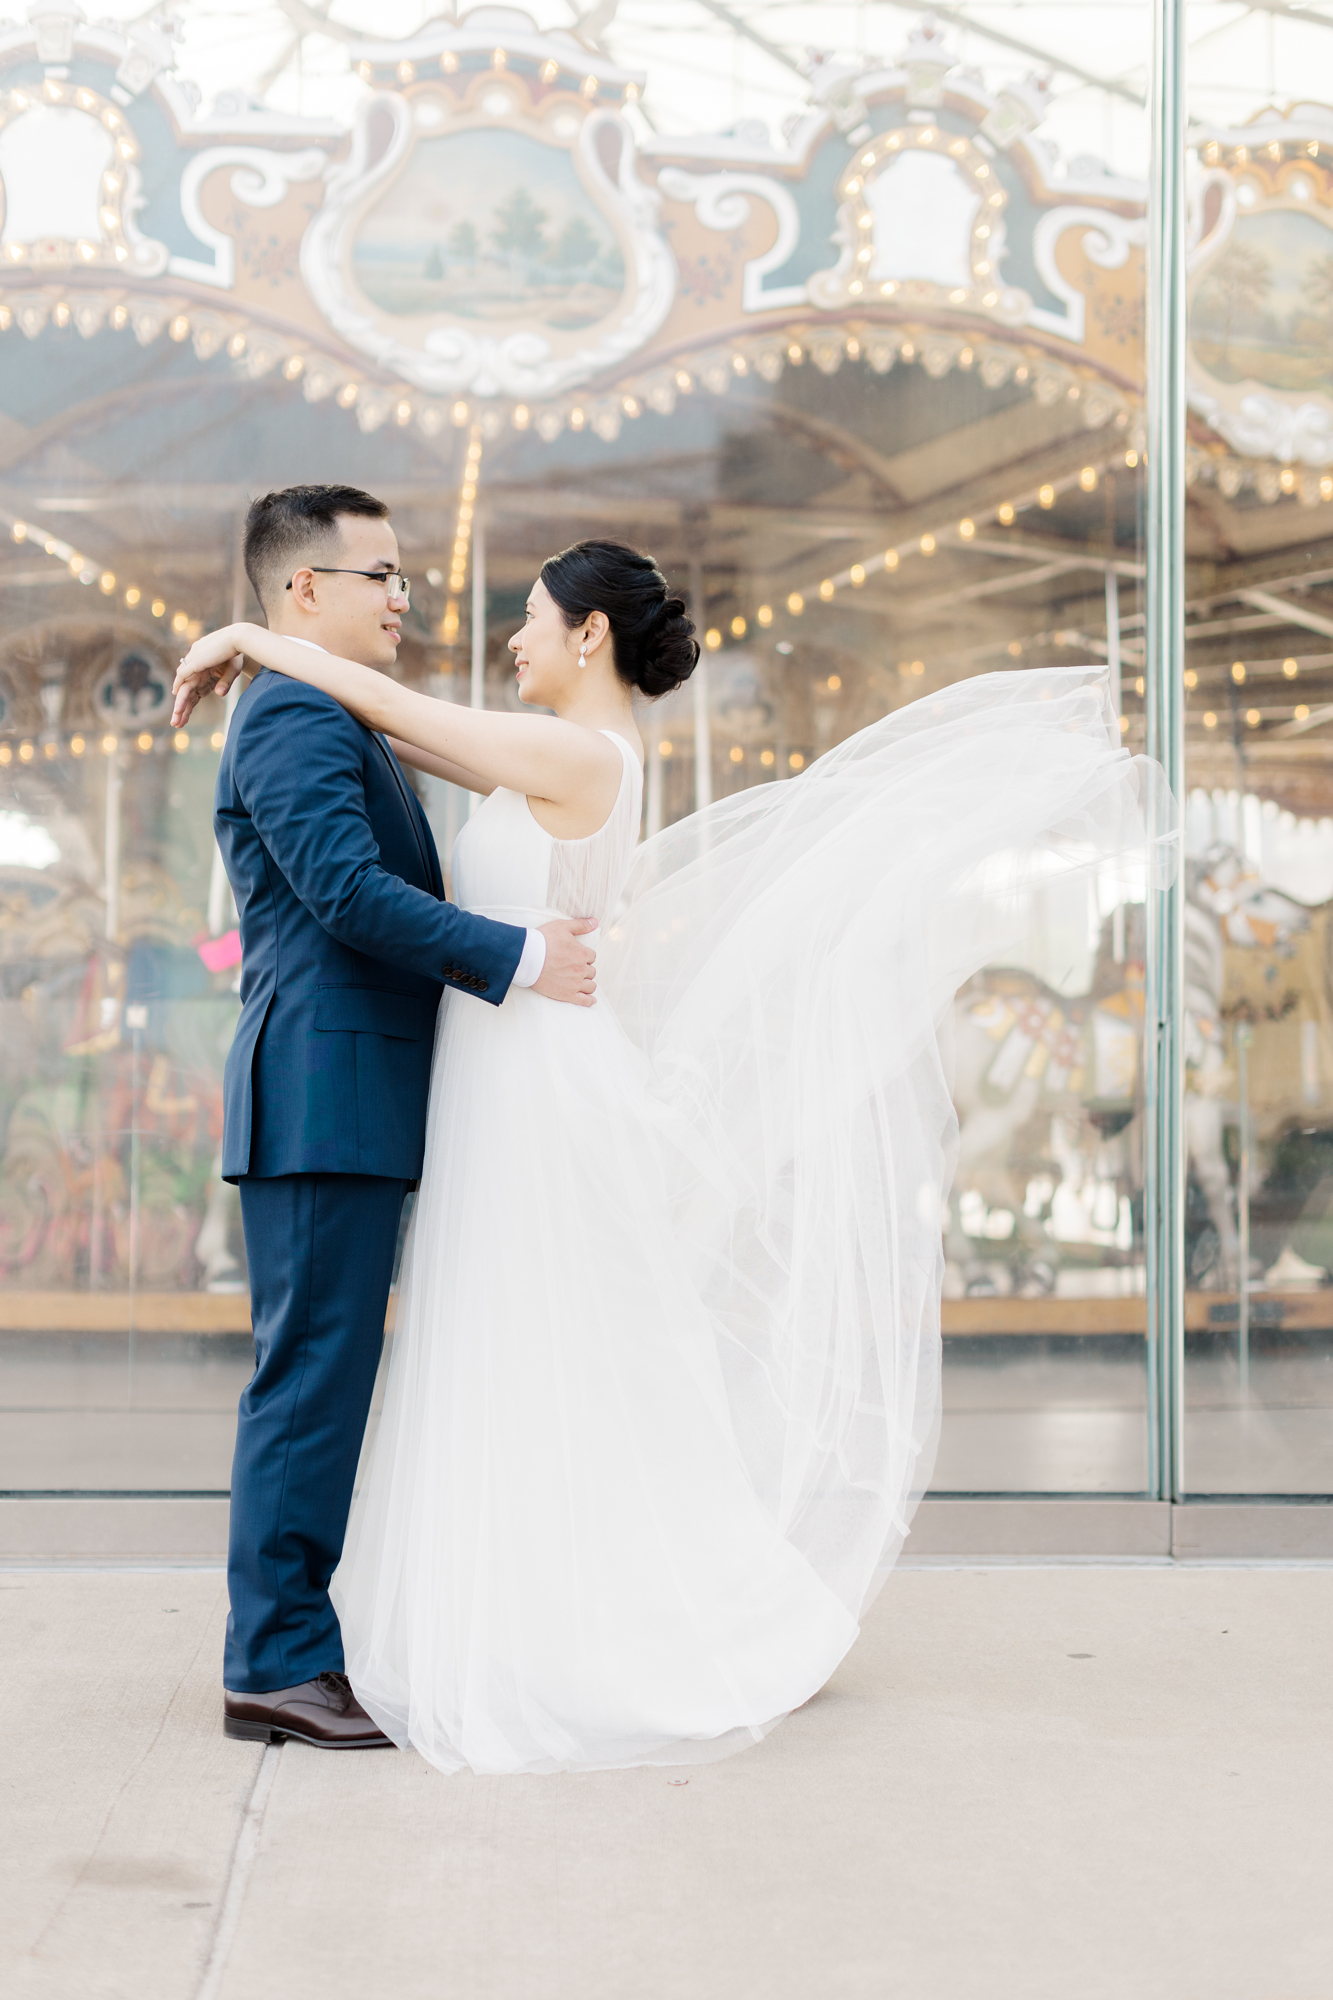 Comfortable Photos of New York Elopement in DUMBO and Central Park